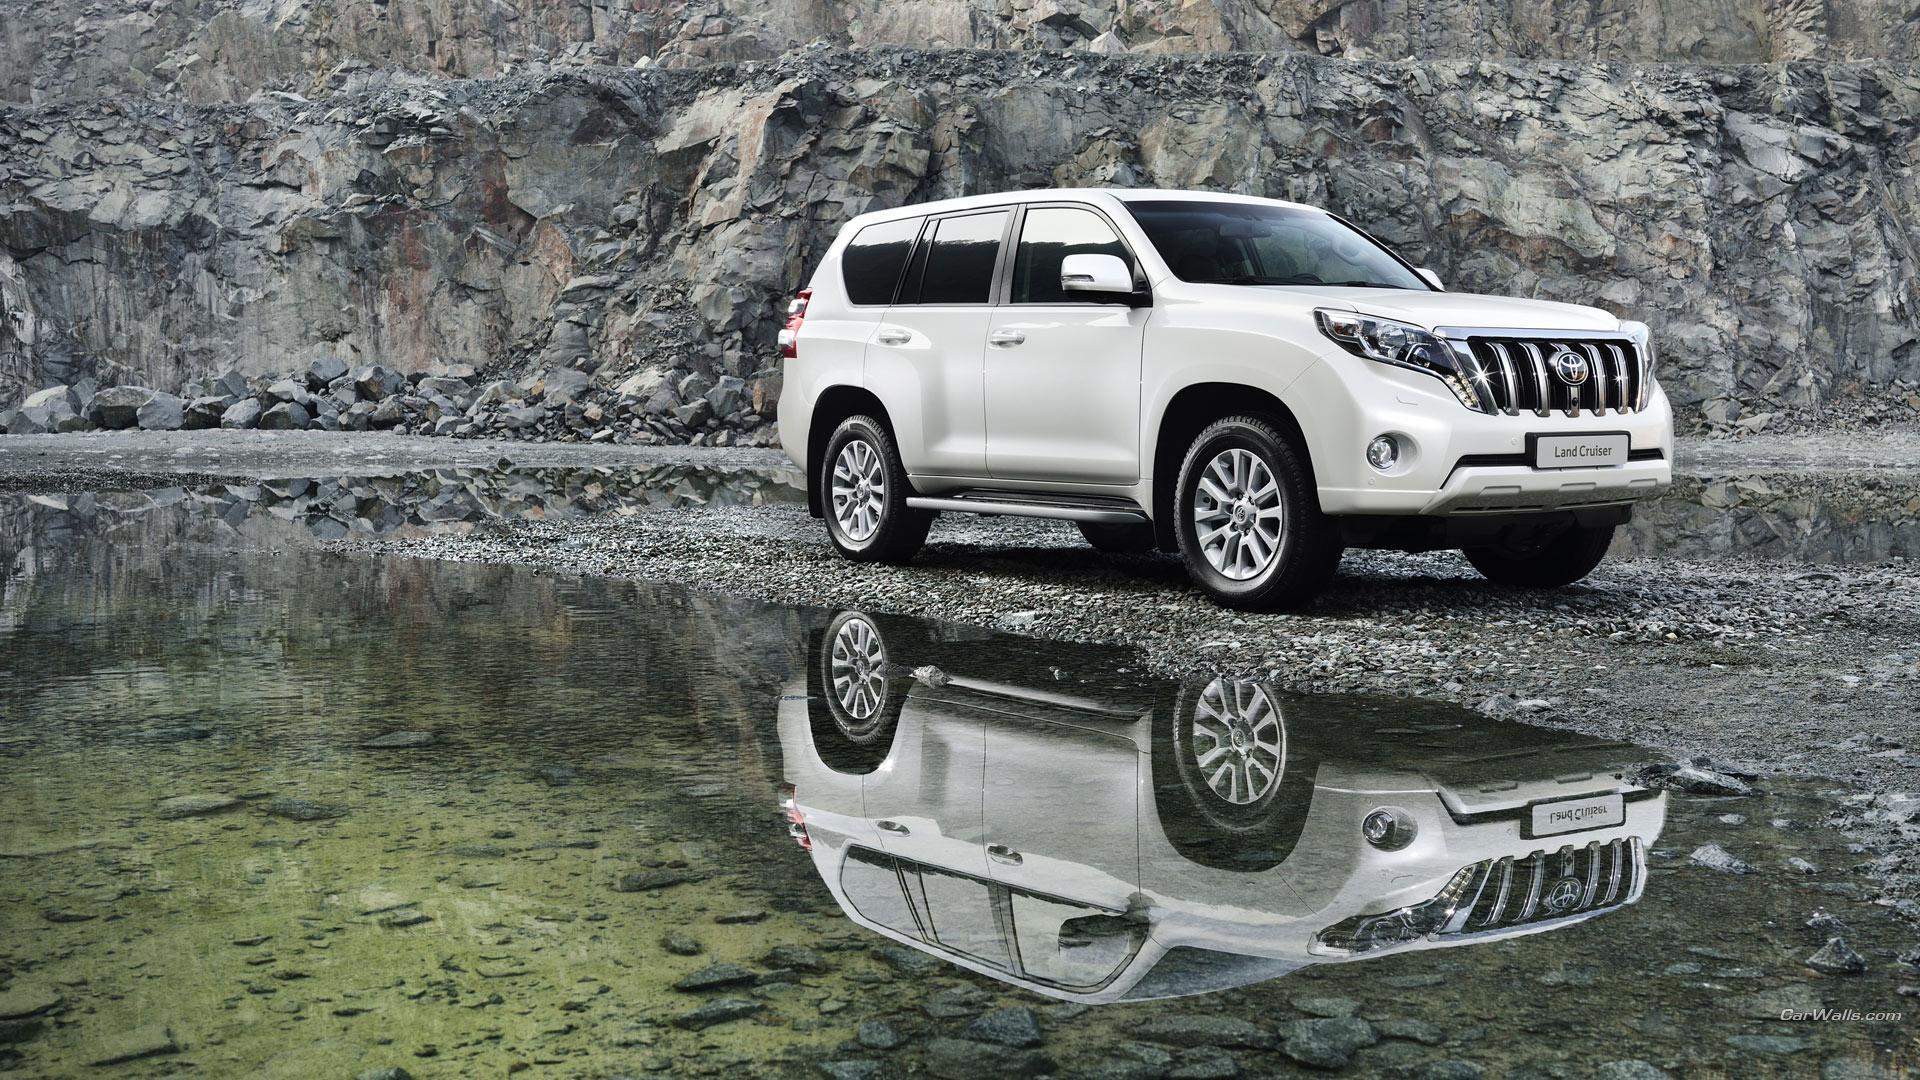 Toyota Land Cruiser Wallpaper and Background Image